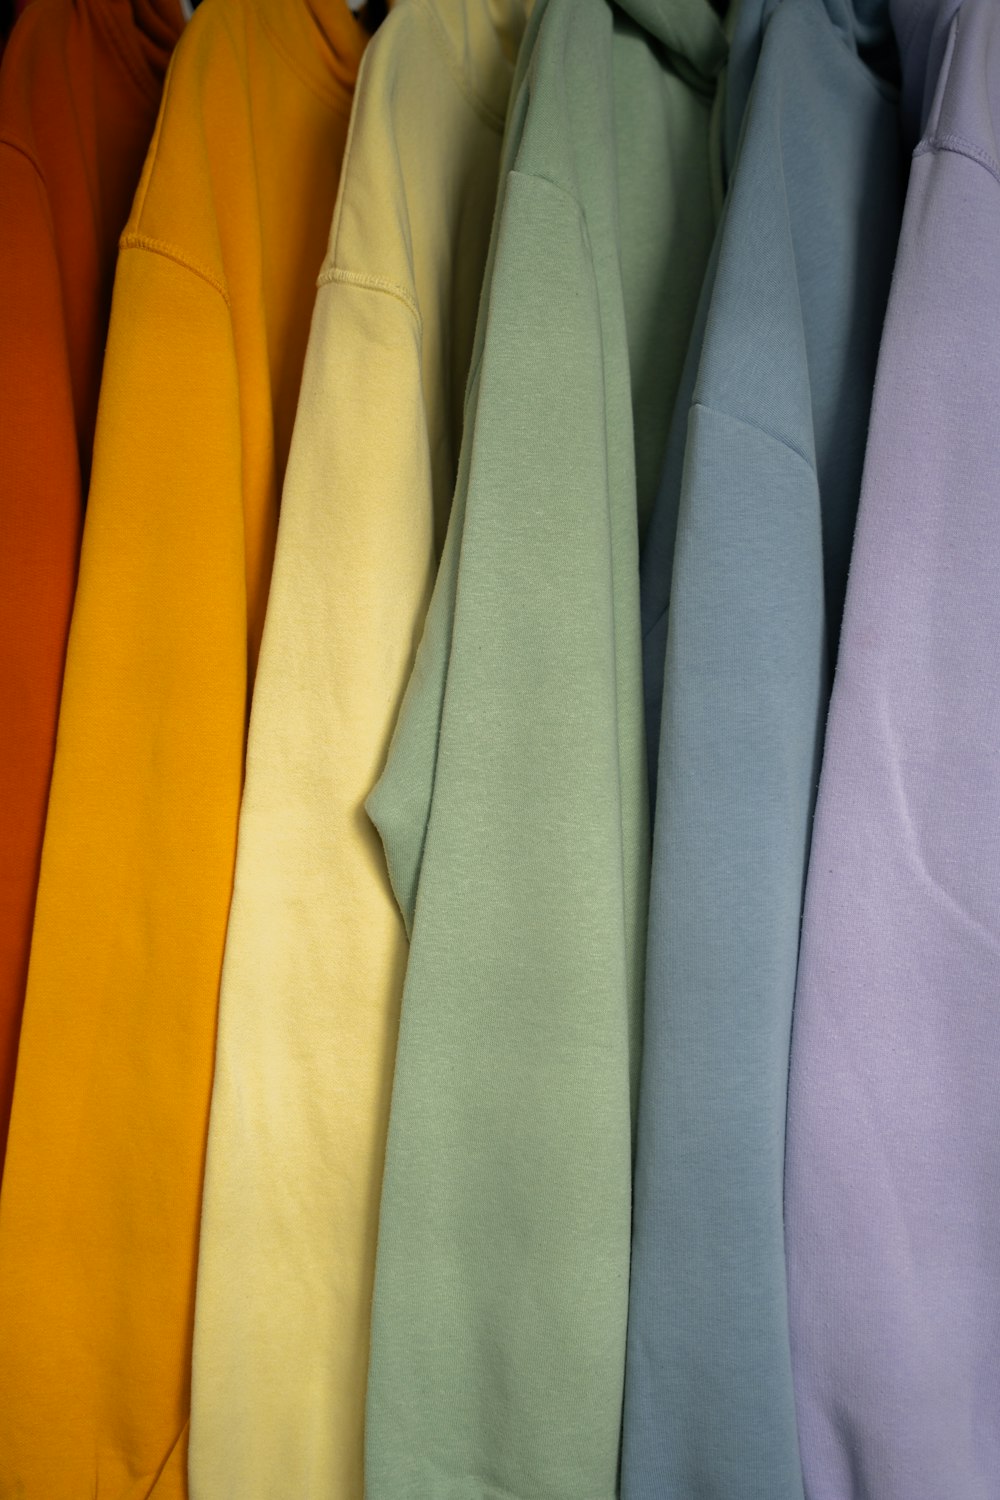 a row of different colored sweatshirts hanging on a rack